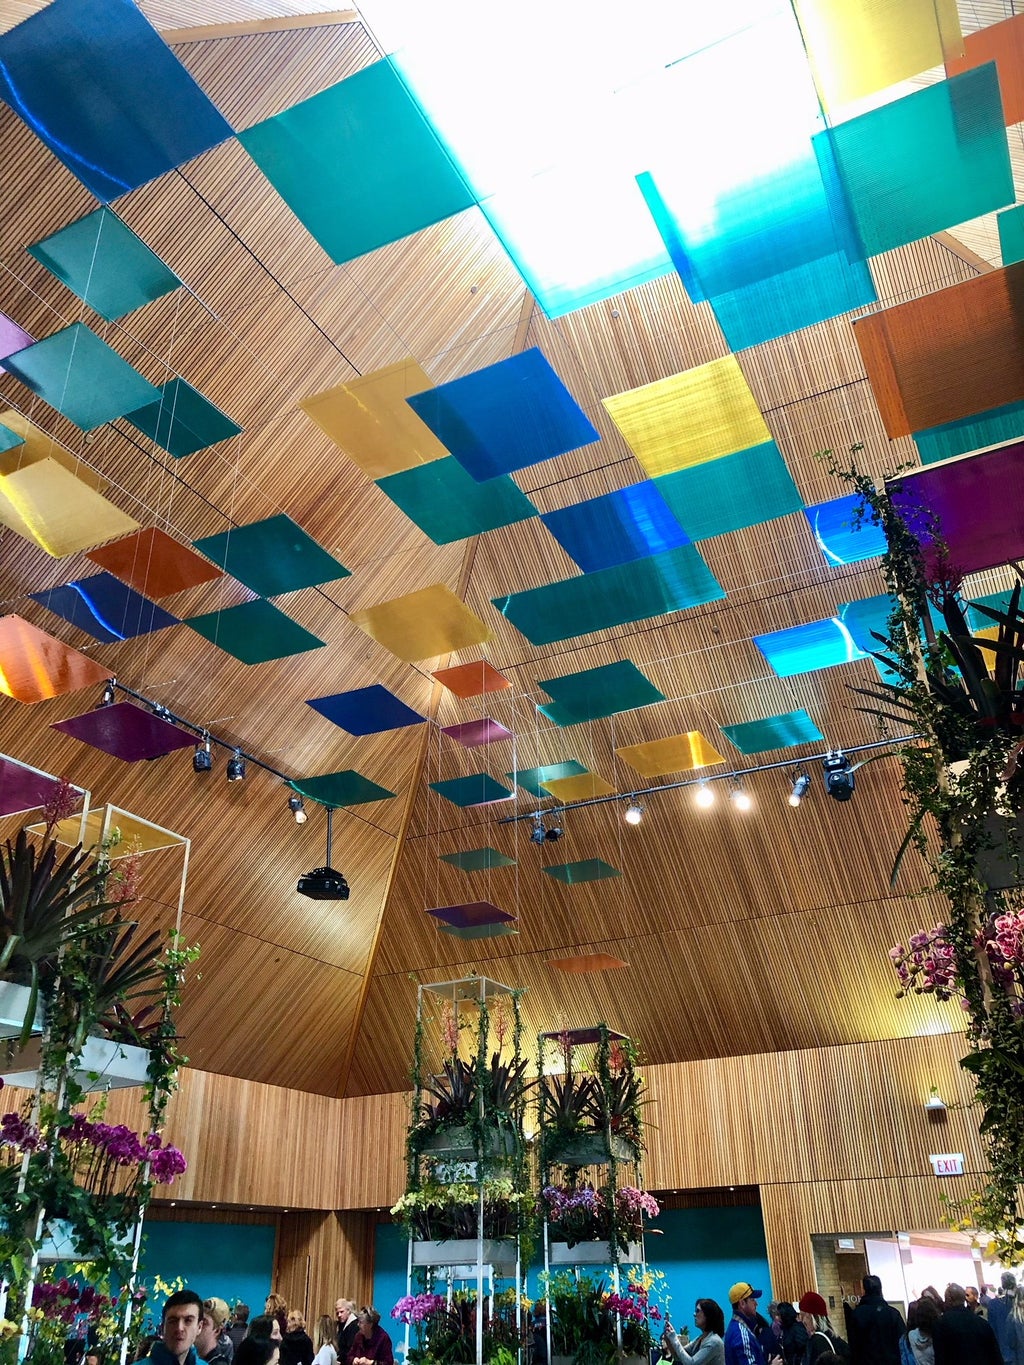 Ceiling with colorful glass squares at Chicago Botanic Garden